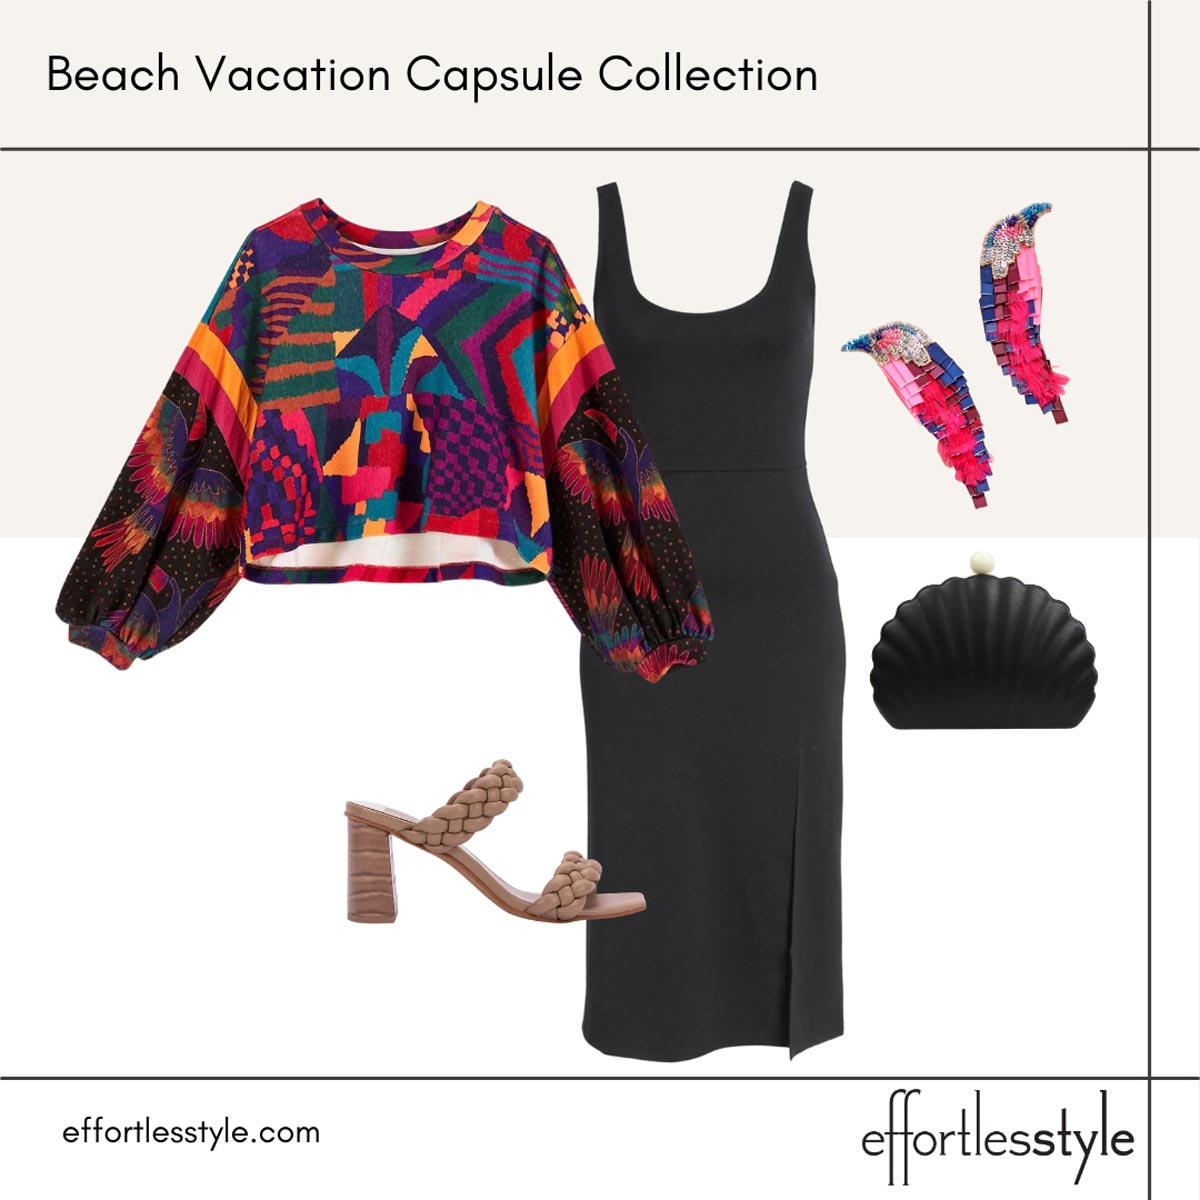 Beach vacation capsule styled looks patterned sweatshirt with dress statement earrings how to style a sweatshirt over a dress how to wear a midi dress nude sandals